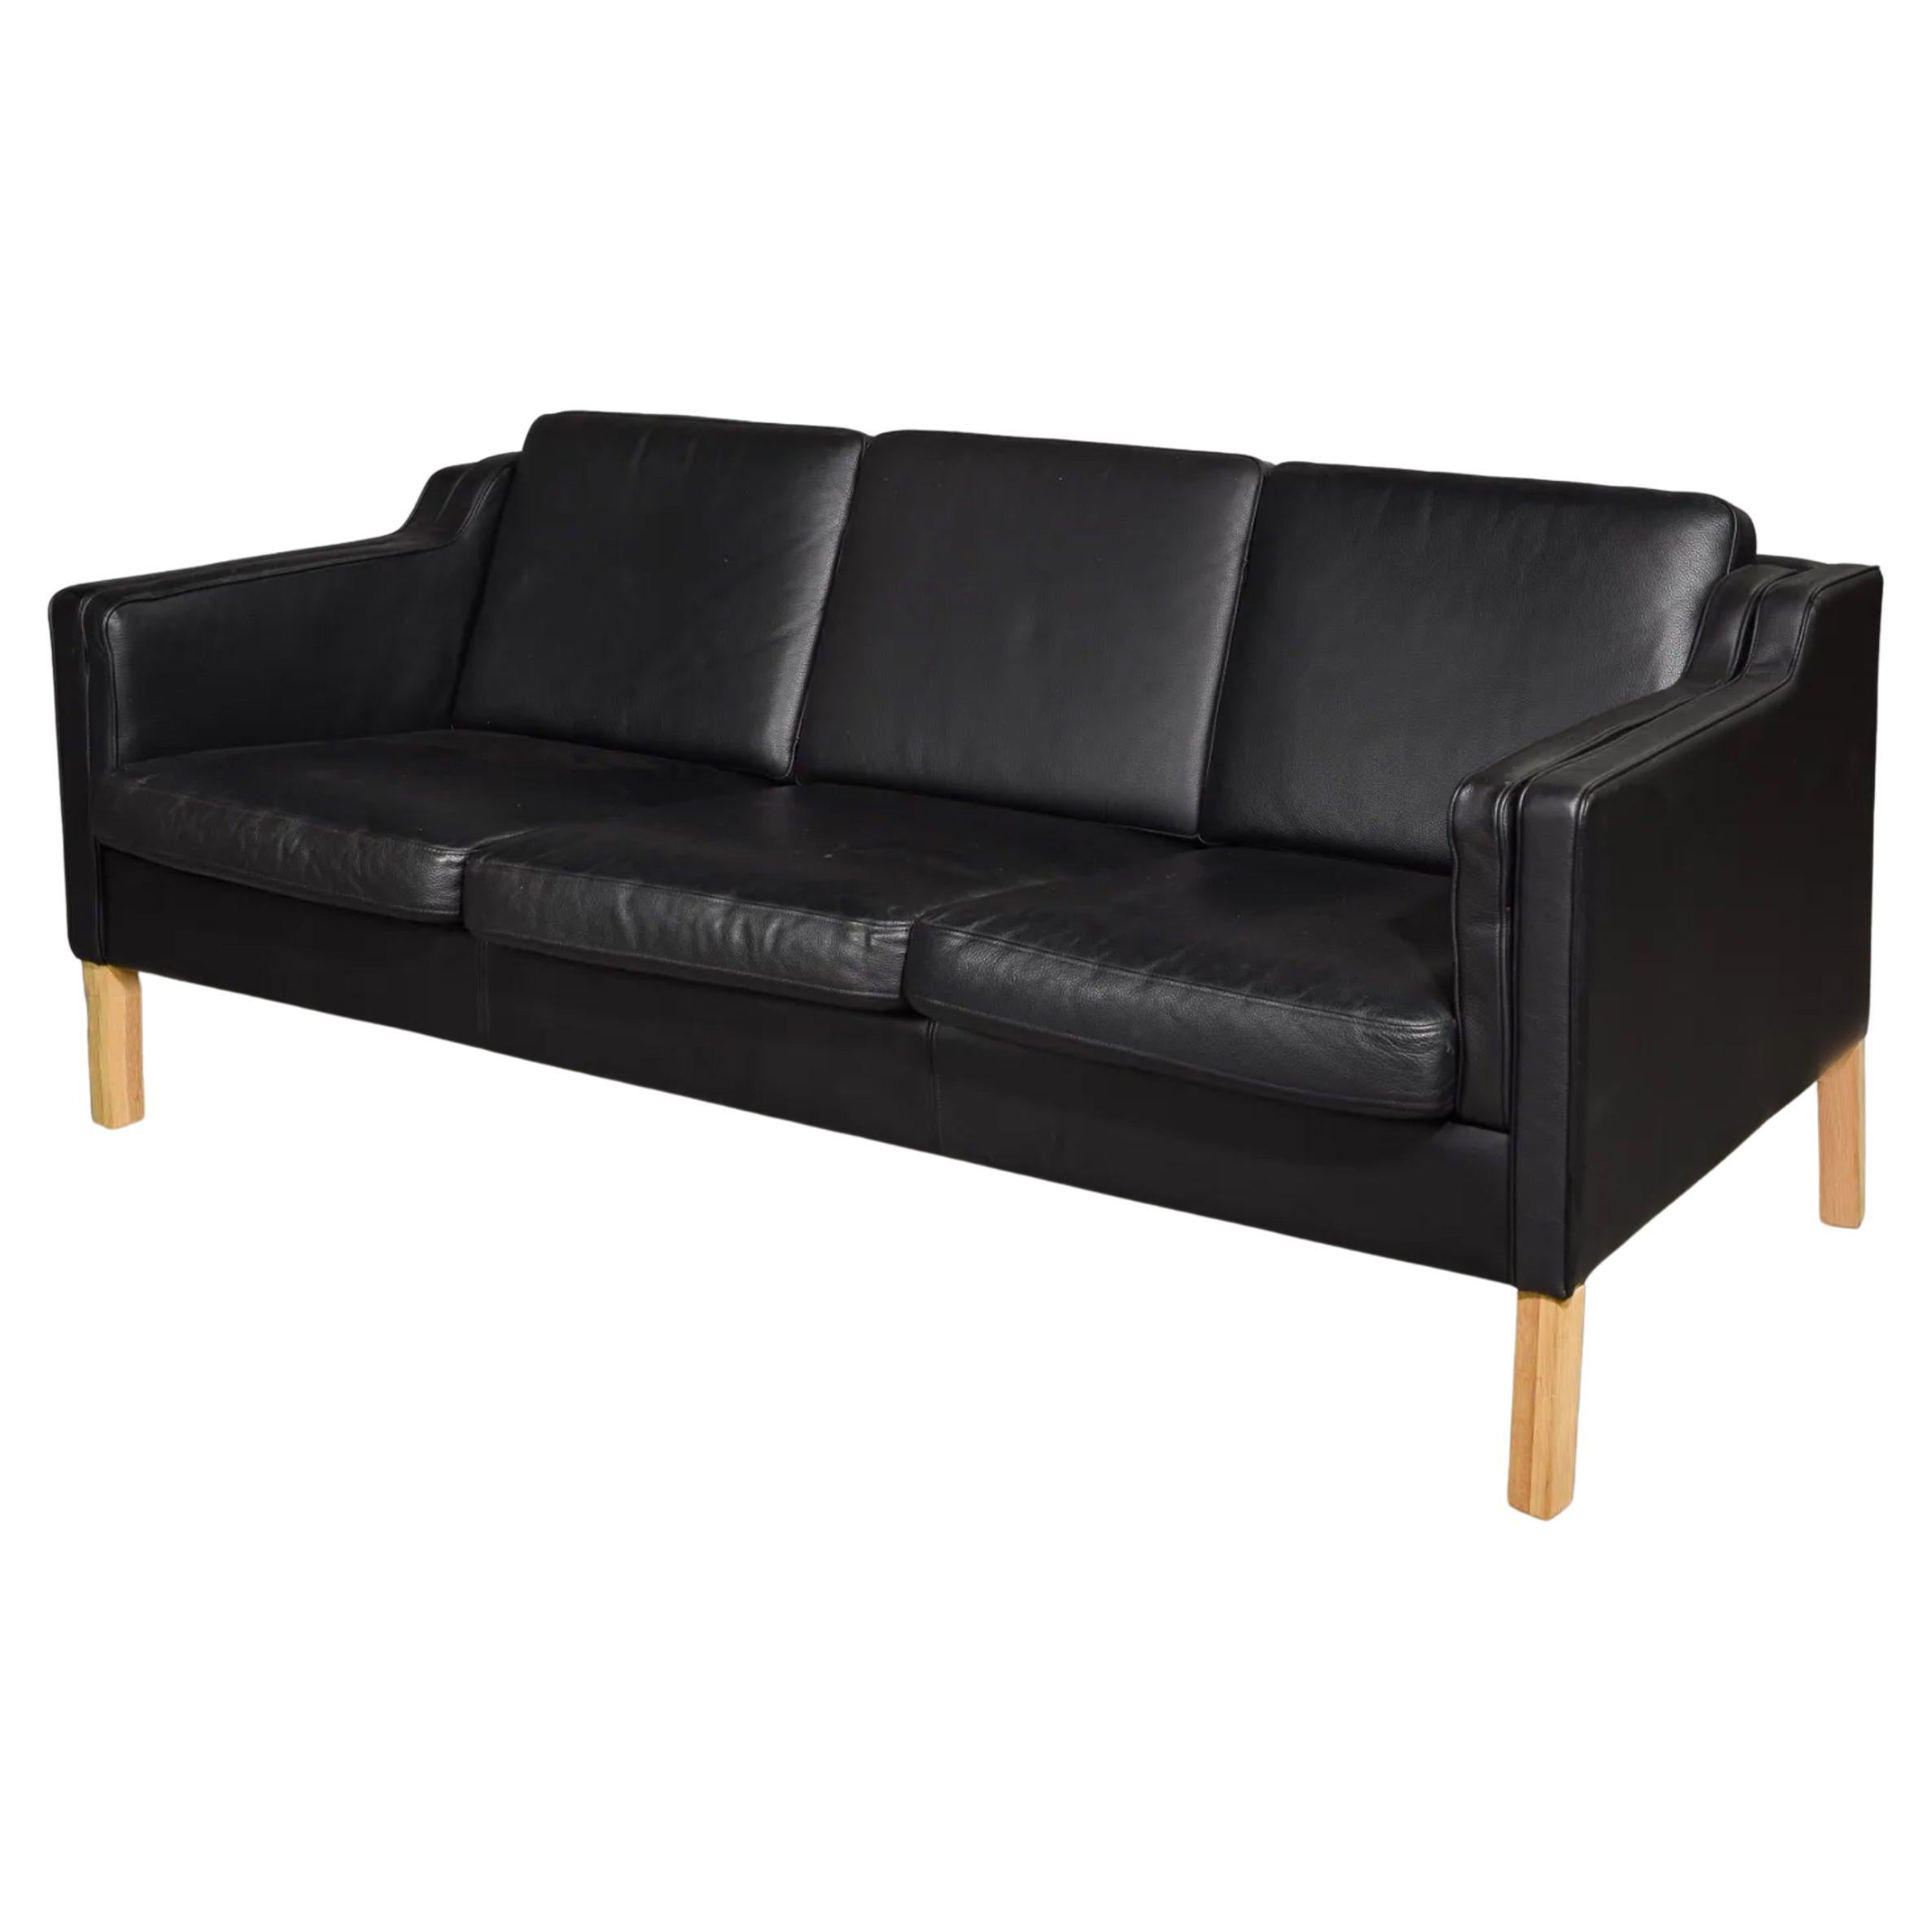 Superb midcentury Danish modern Black leather 3 seat sofa Birch wood legs. Style of Børge Mogensen. Beautiful Black leather is soft and shows little signs of use but broken in nicely. Great Danish Modern sofa. Great condition. Sofa is made by Stouby